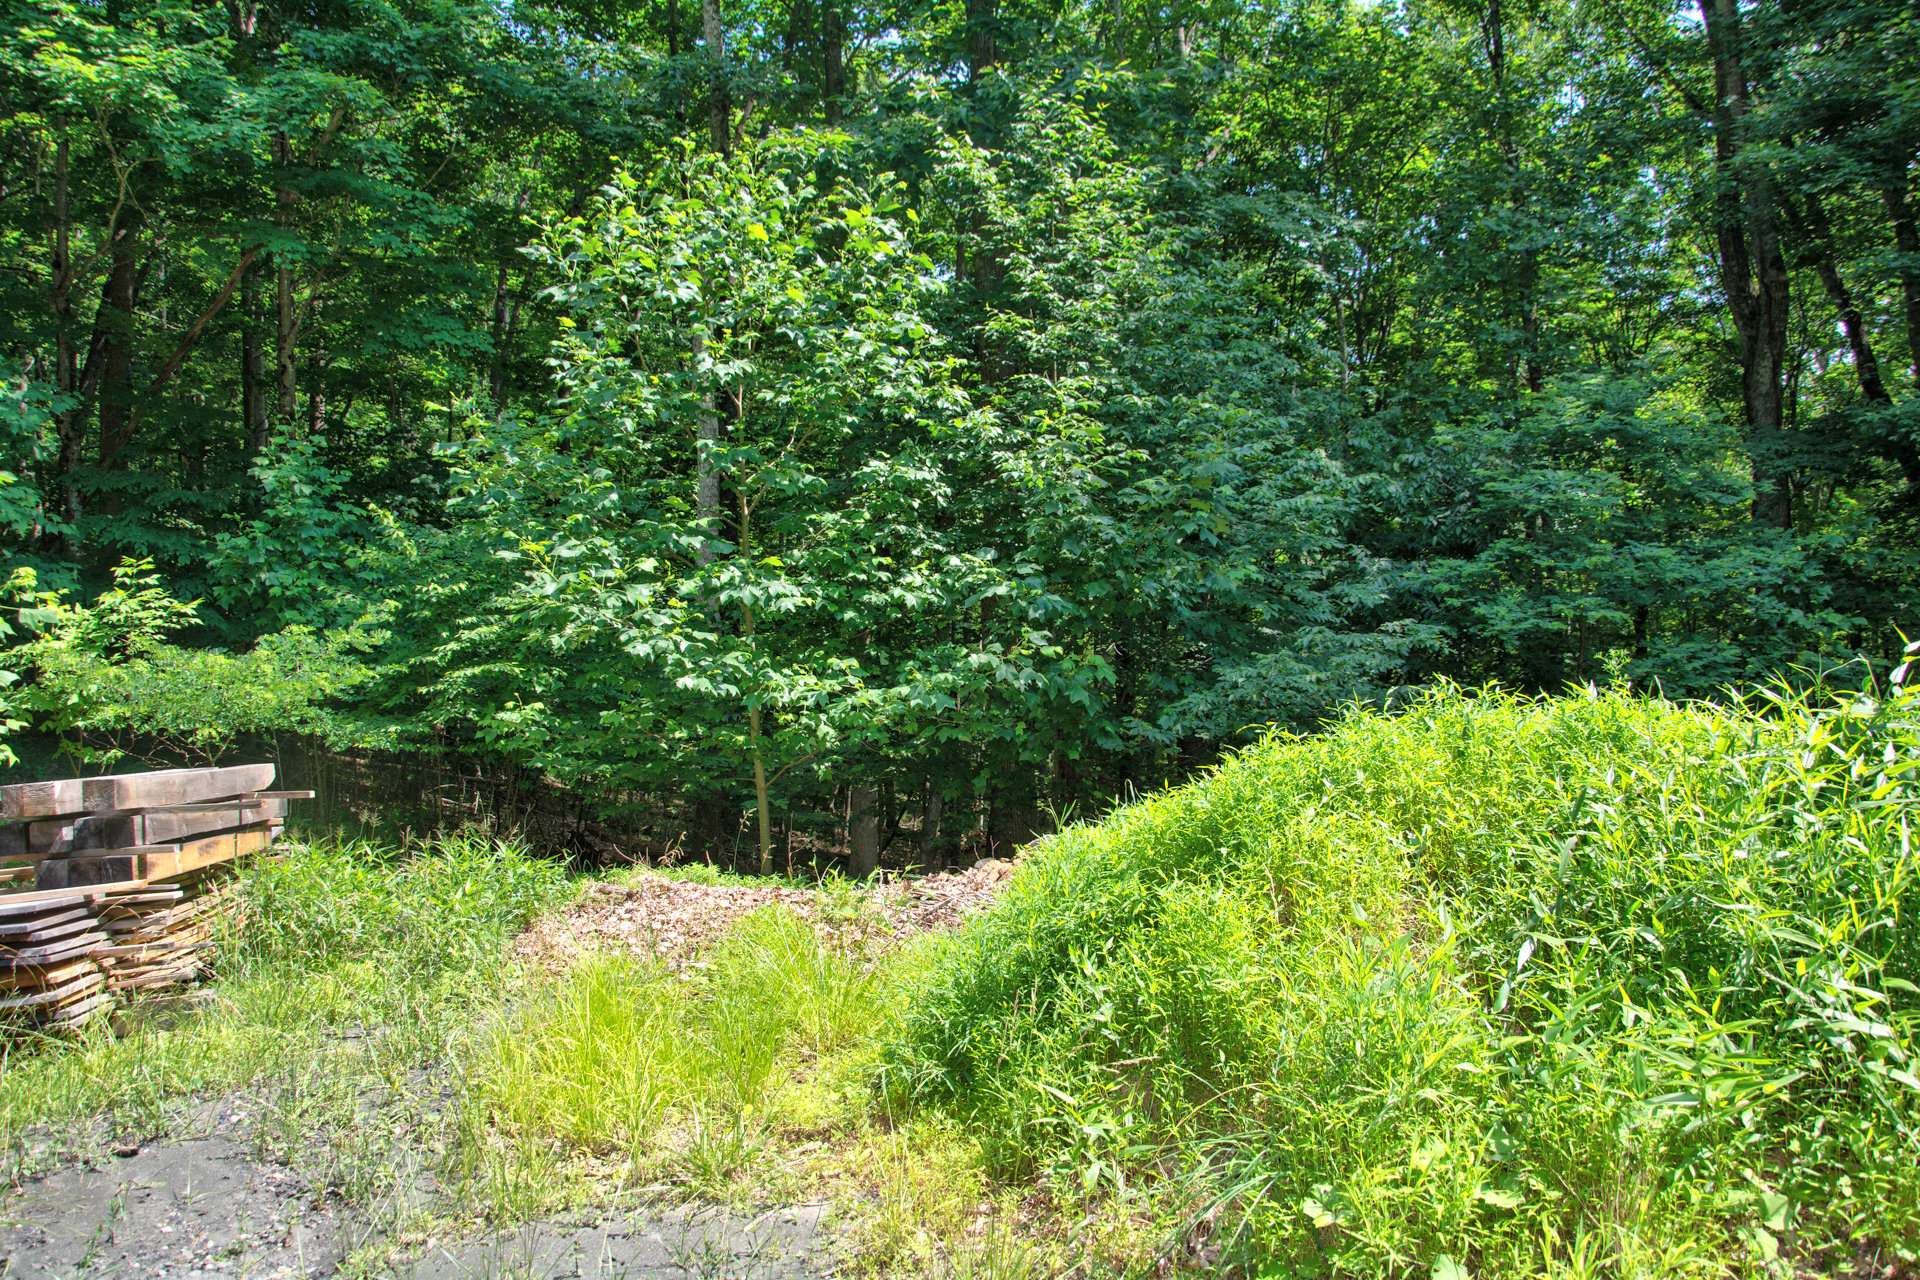 Lot 41 is a 1.14 acre home site on Tomahawk Drive with shared well rights as water source and offered at $45,000.